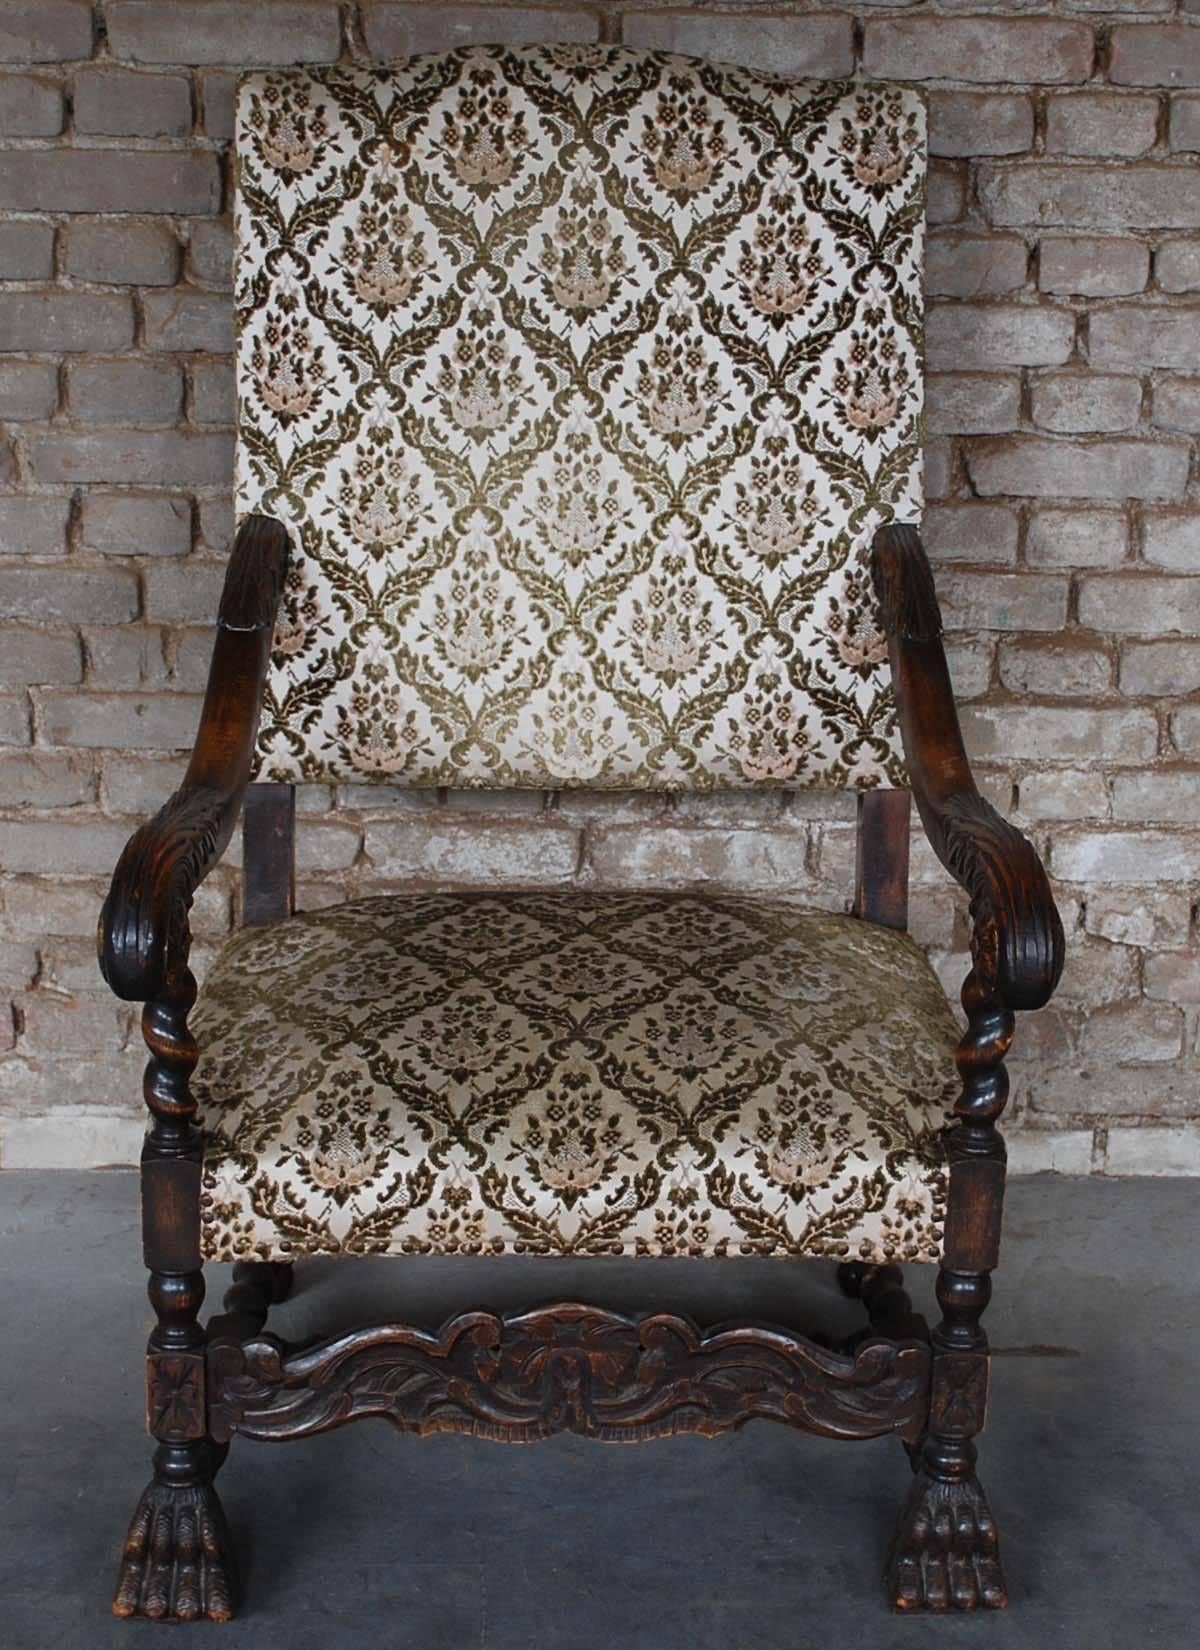 This late 19th century tall back French throne chair is made in solid beechwood.
It has the original upholstery. The armrests have acanthus leave carvings.
With spooled legs that end in claw feet and H-stretcher that provide stability.
The wood